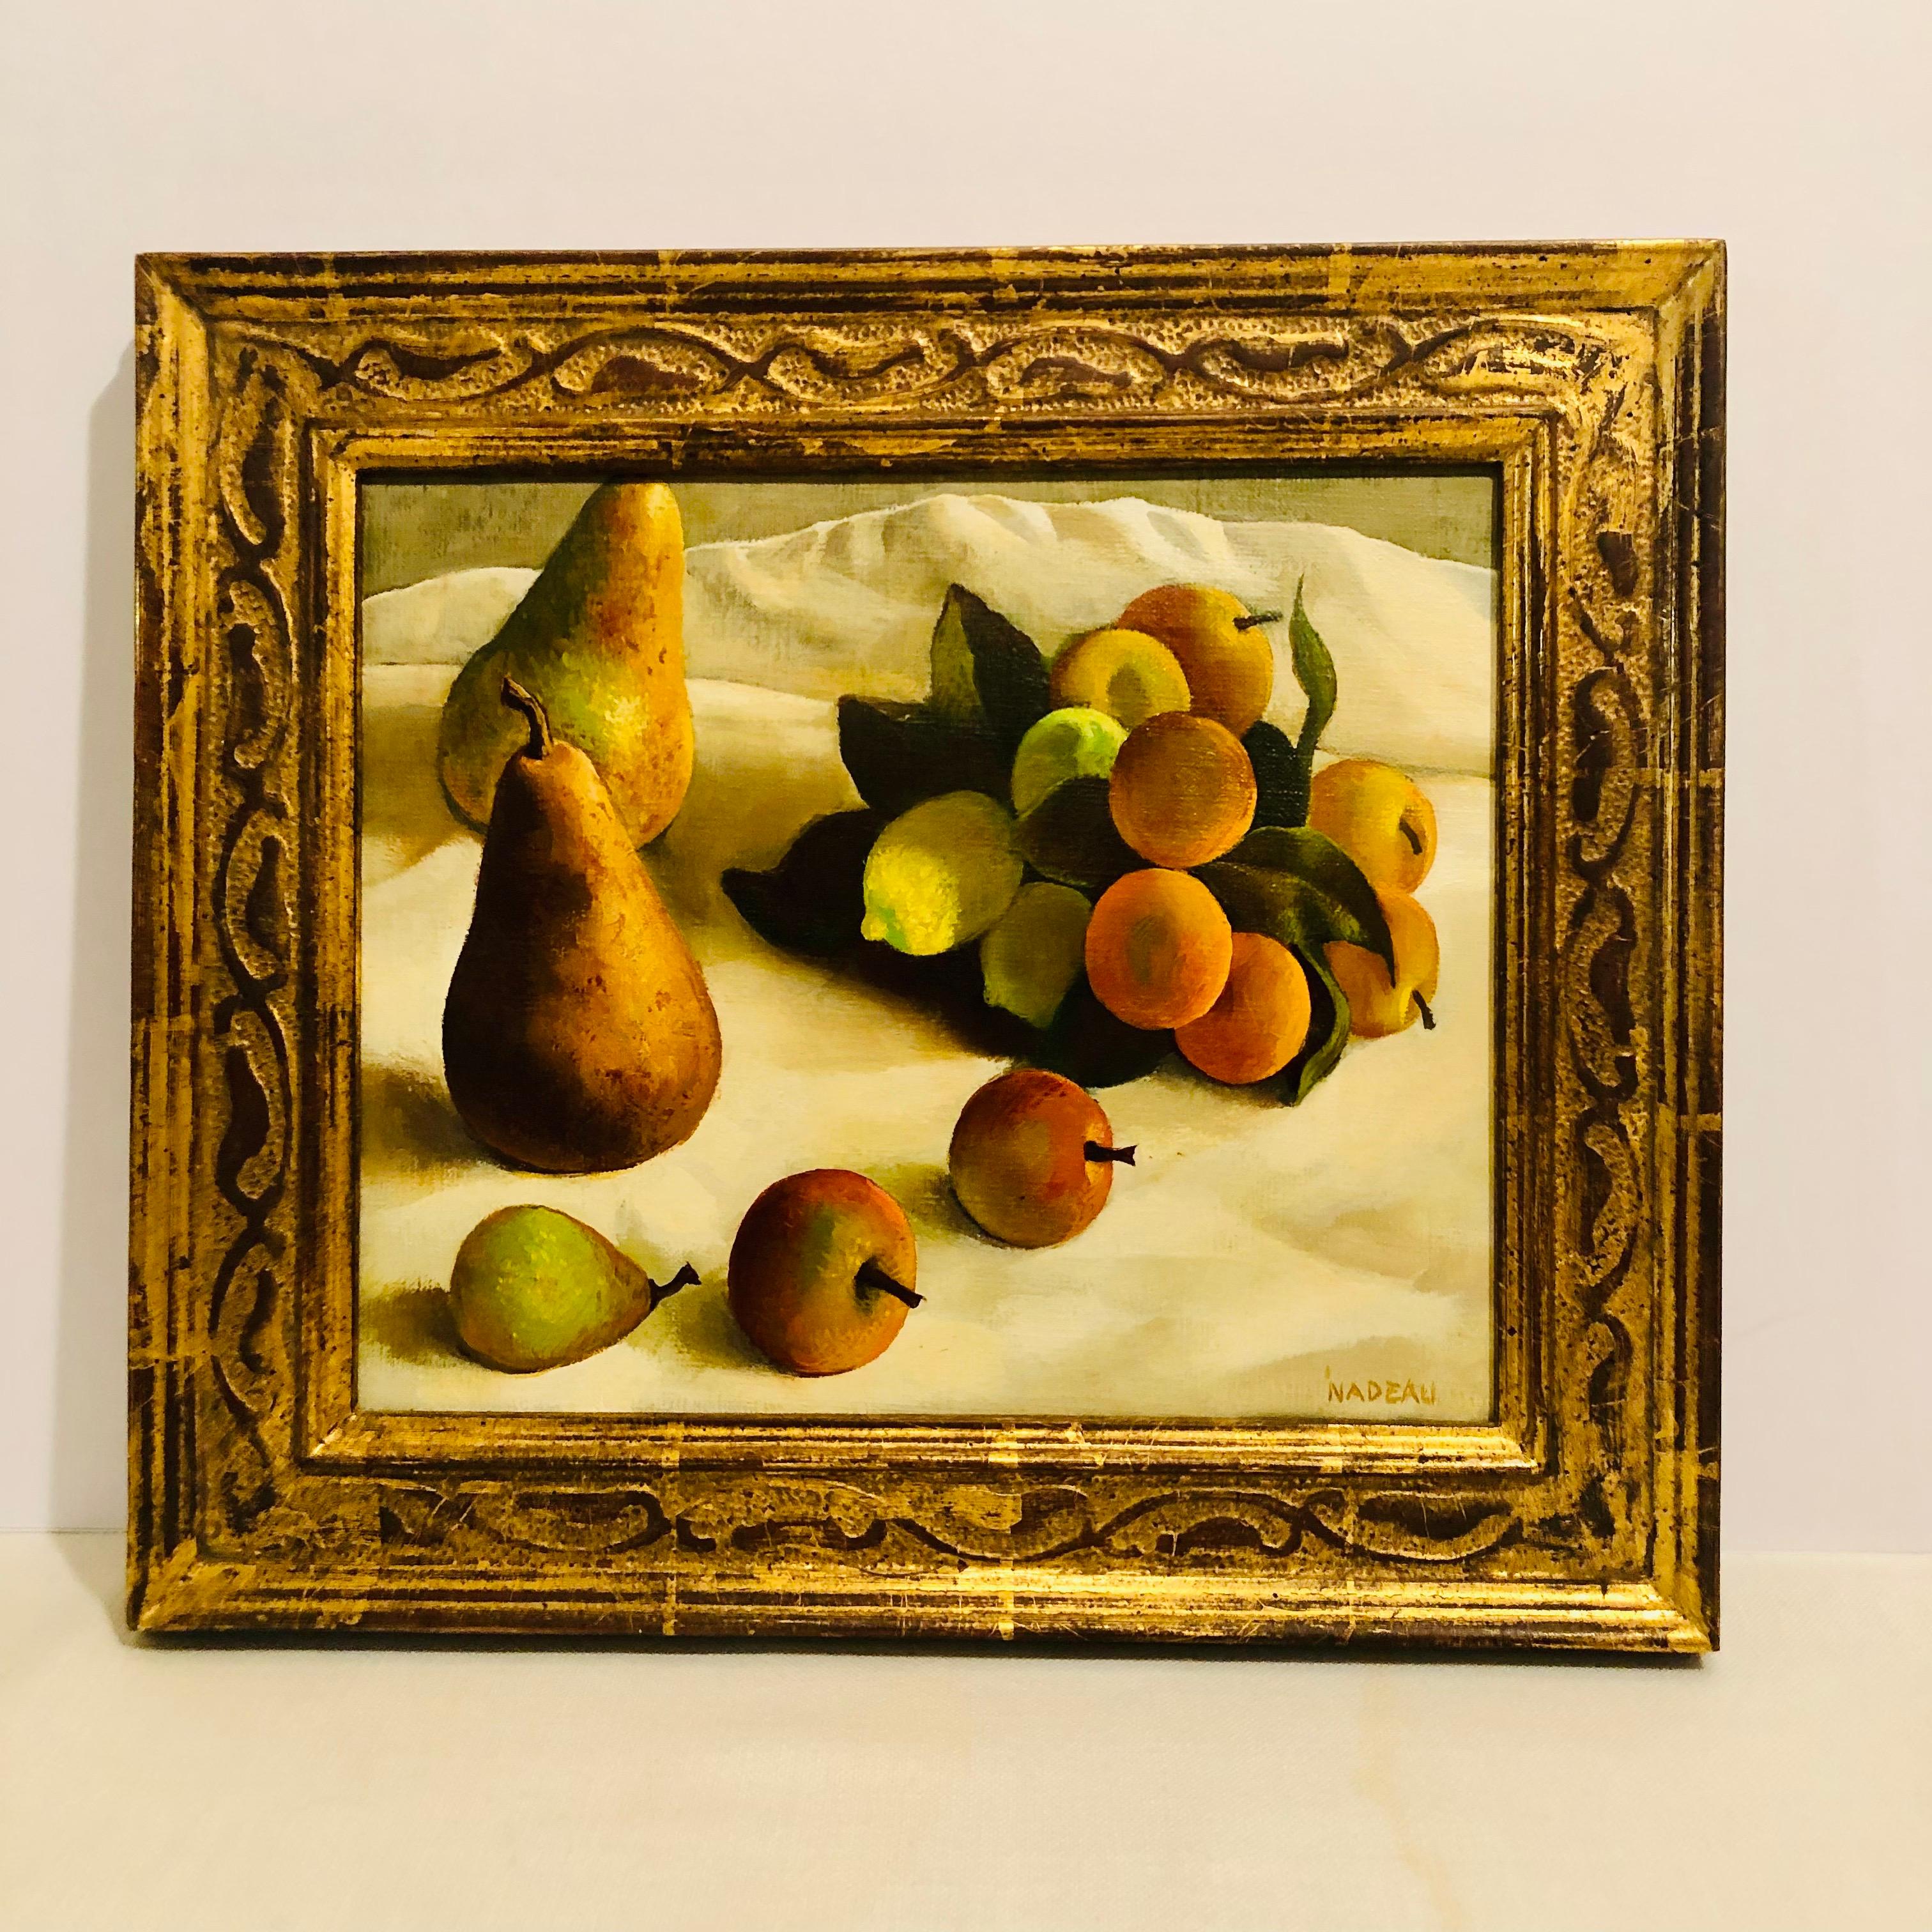 Oil on Canvas Painting of Pears and Other Fruits in a Gold Frame Signed Nadeau 3